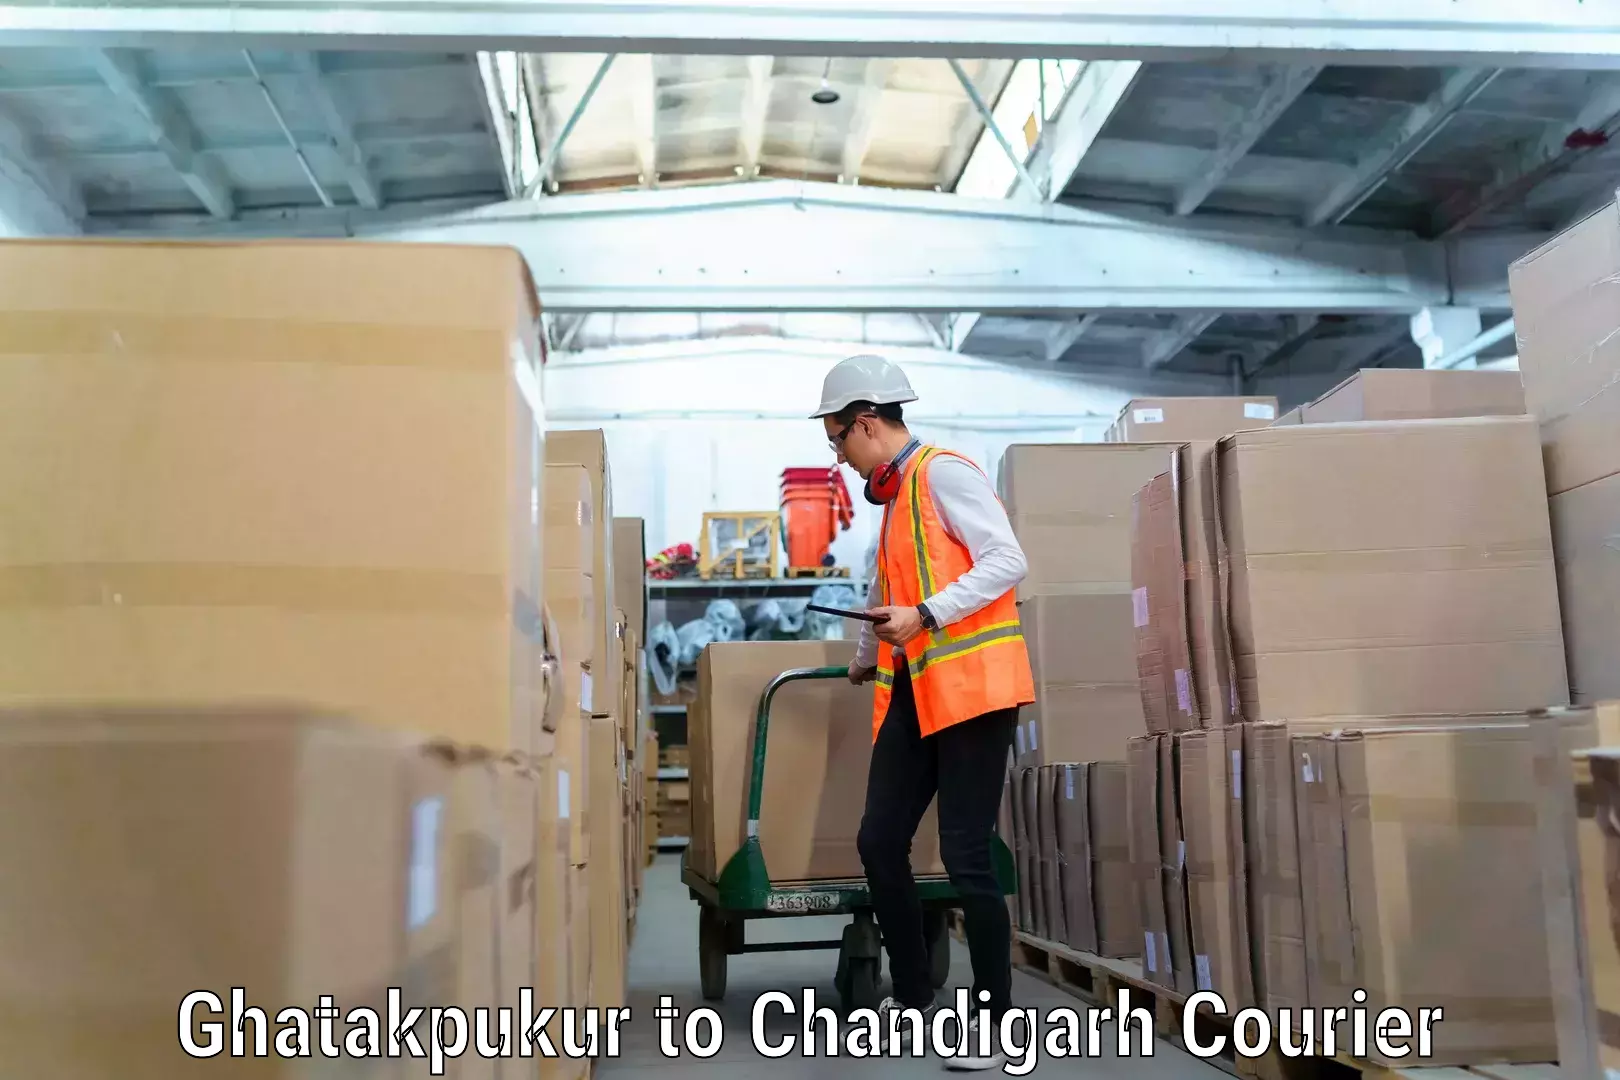 Furniture relocation experts Ghatakpukur to Chandigarh